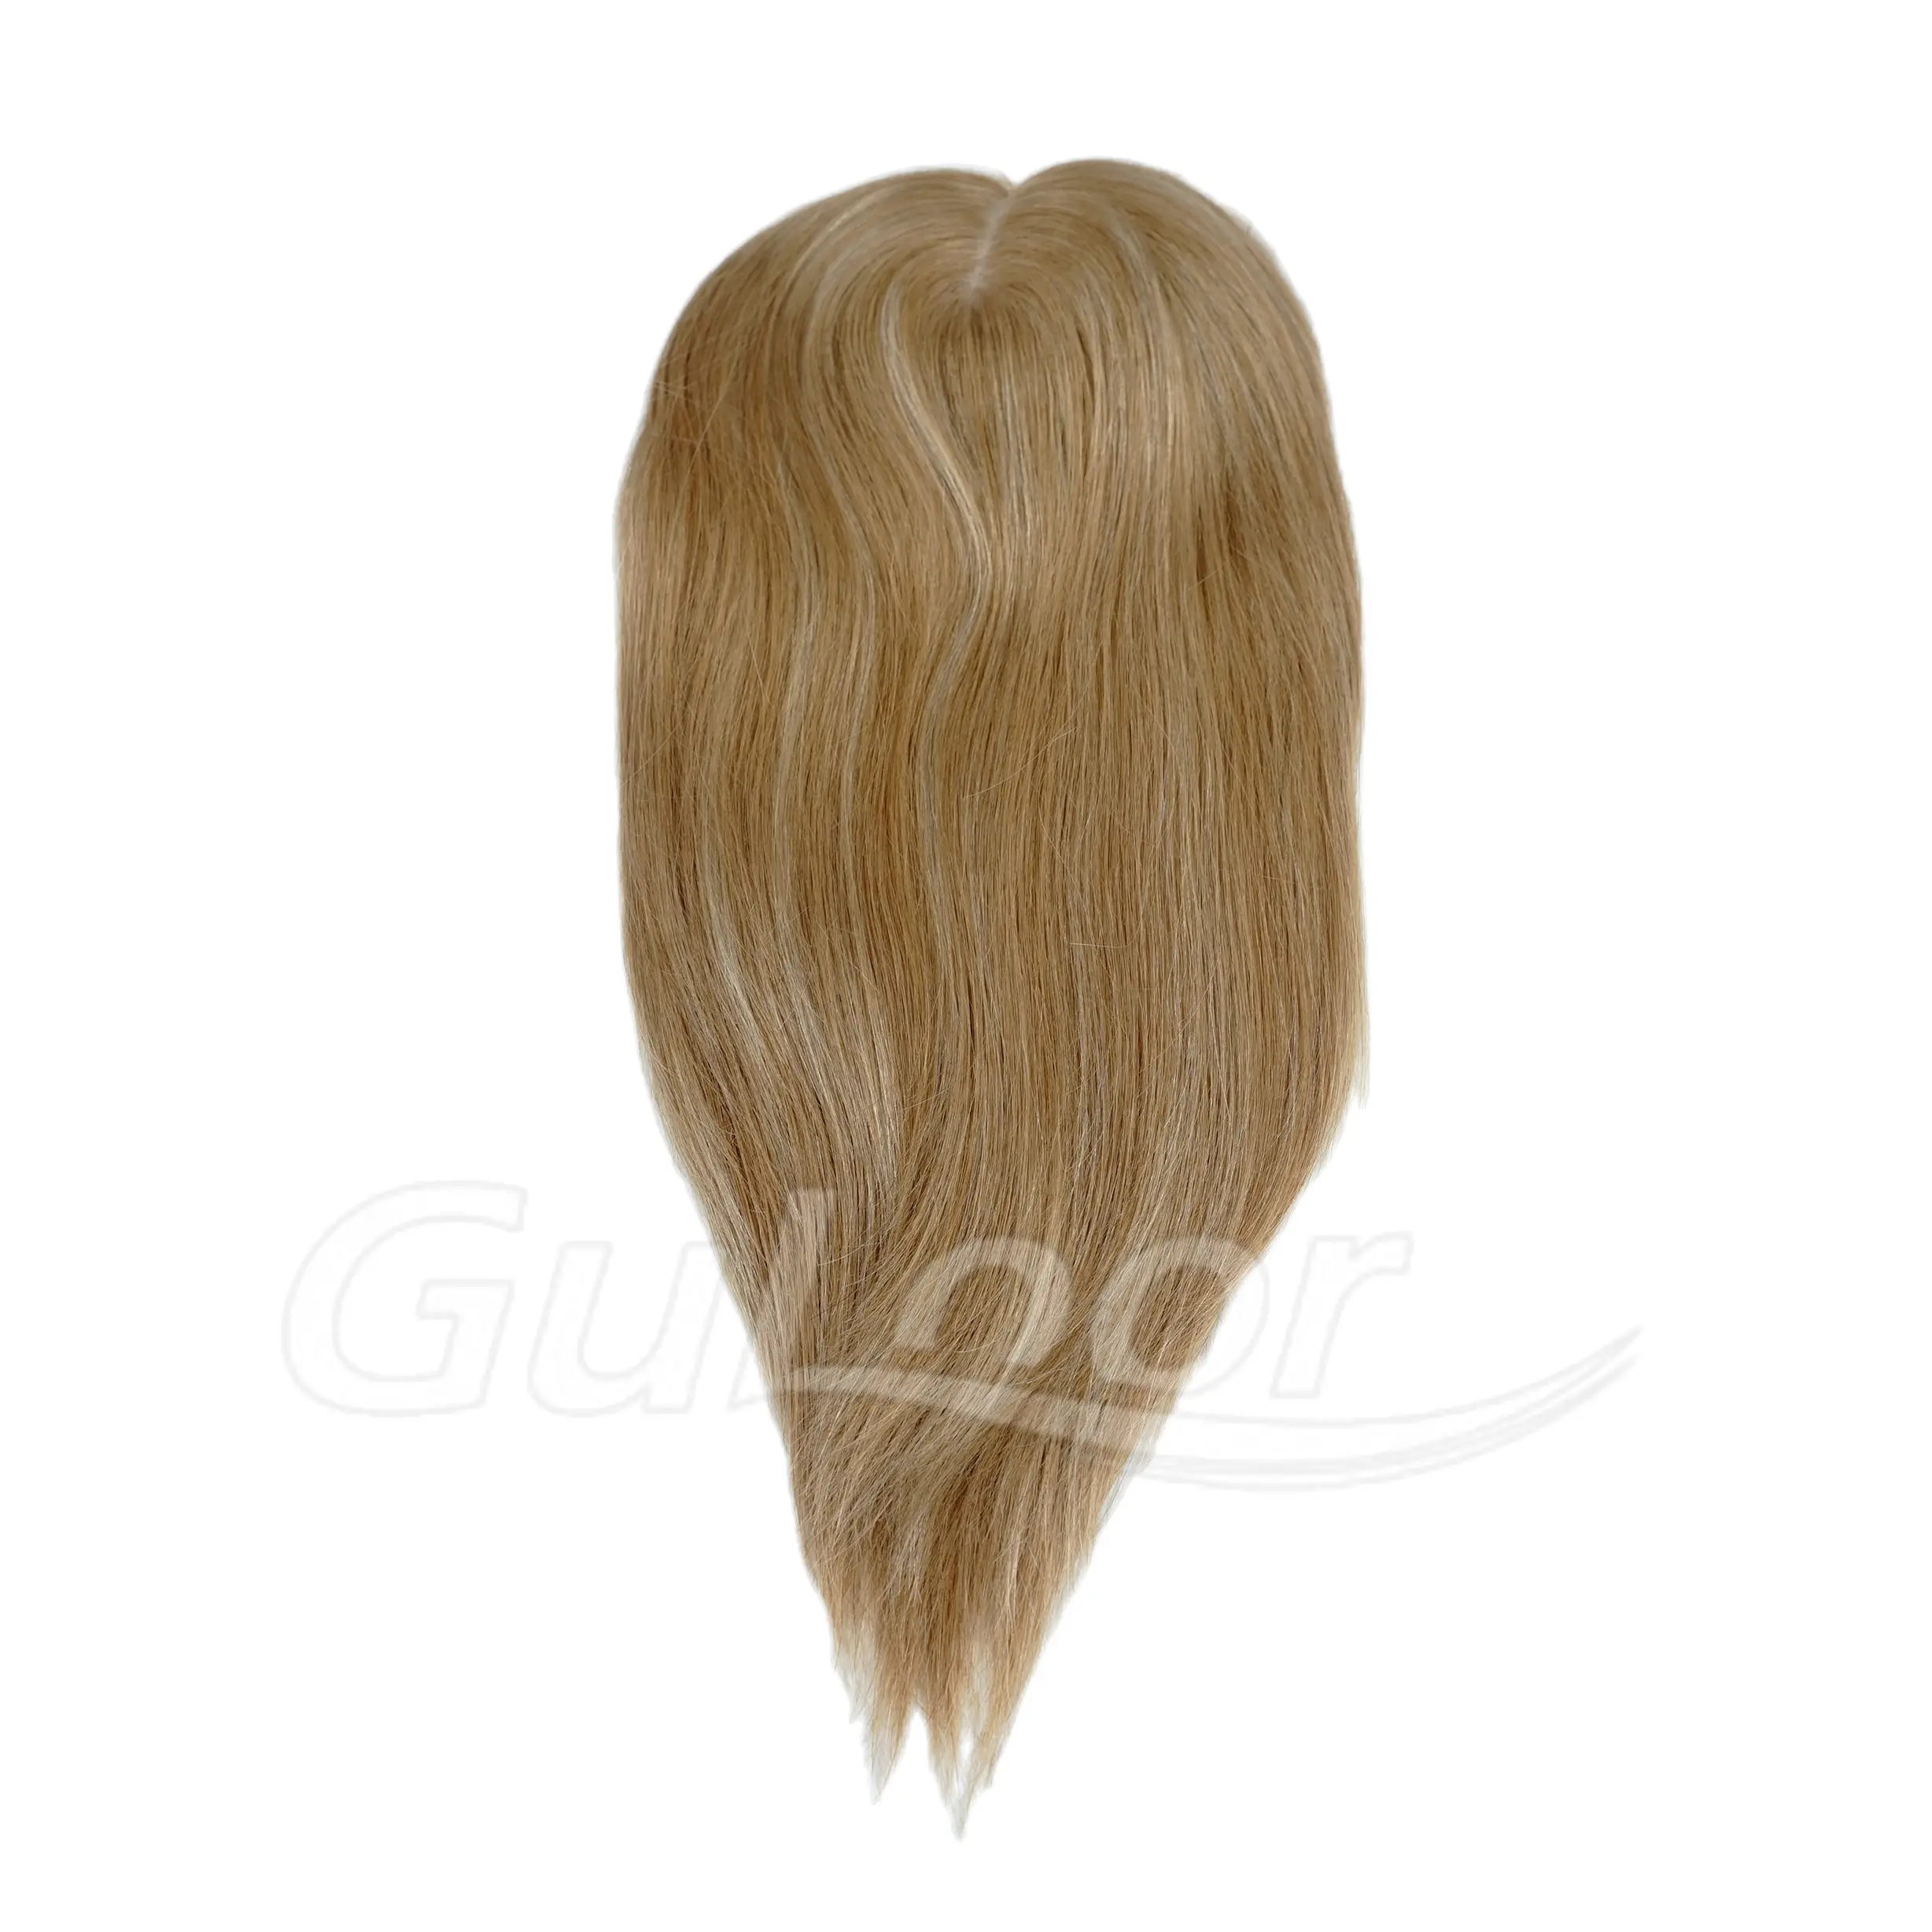 14 Inches Color R6/27 Silk Top 100% Human Hair Topper With Lace Front Natural Straight